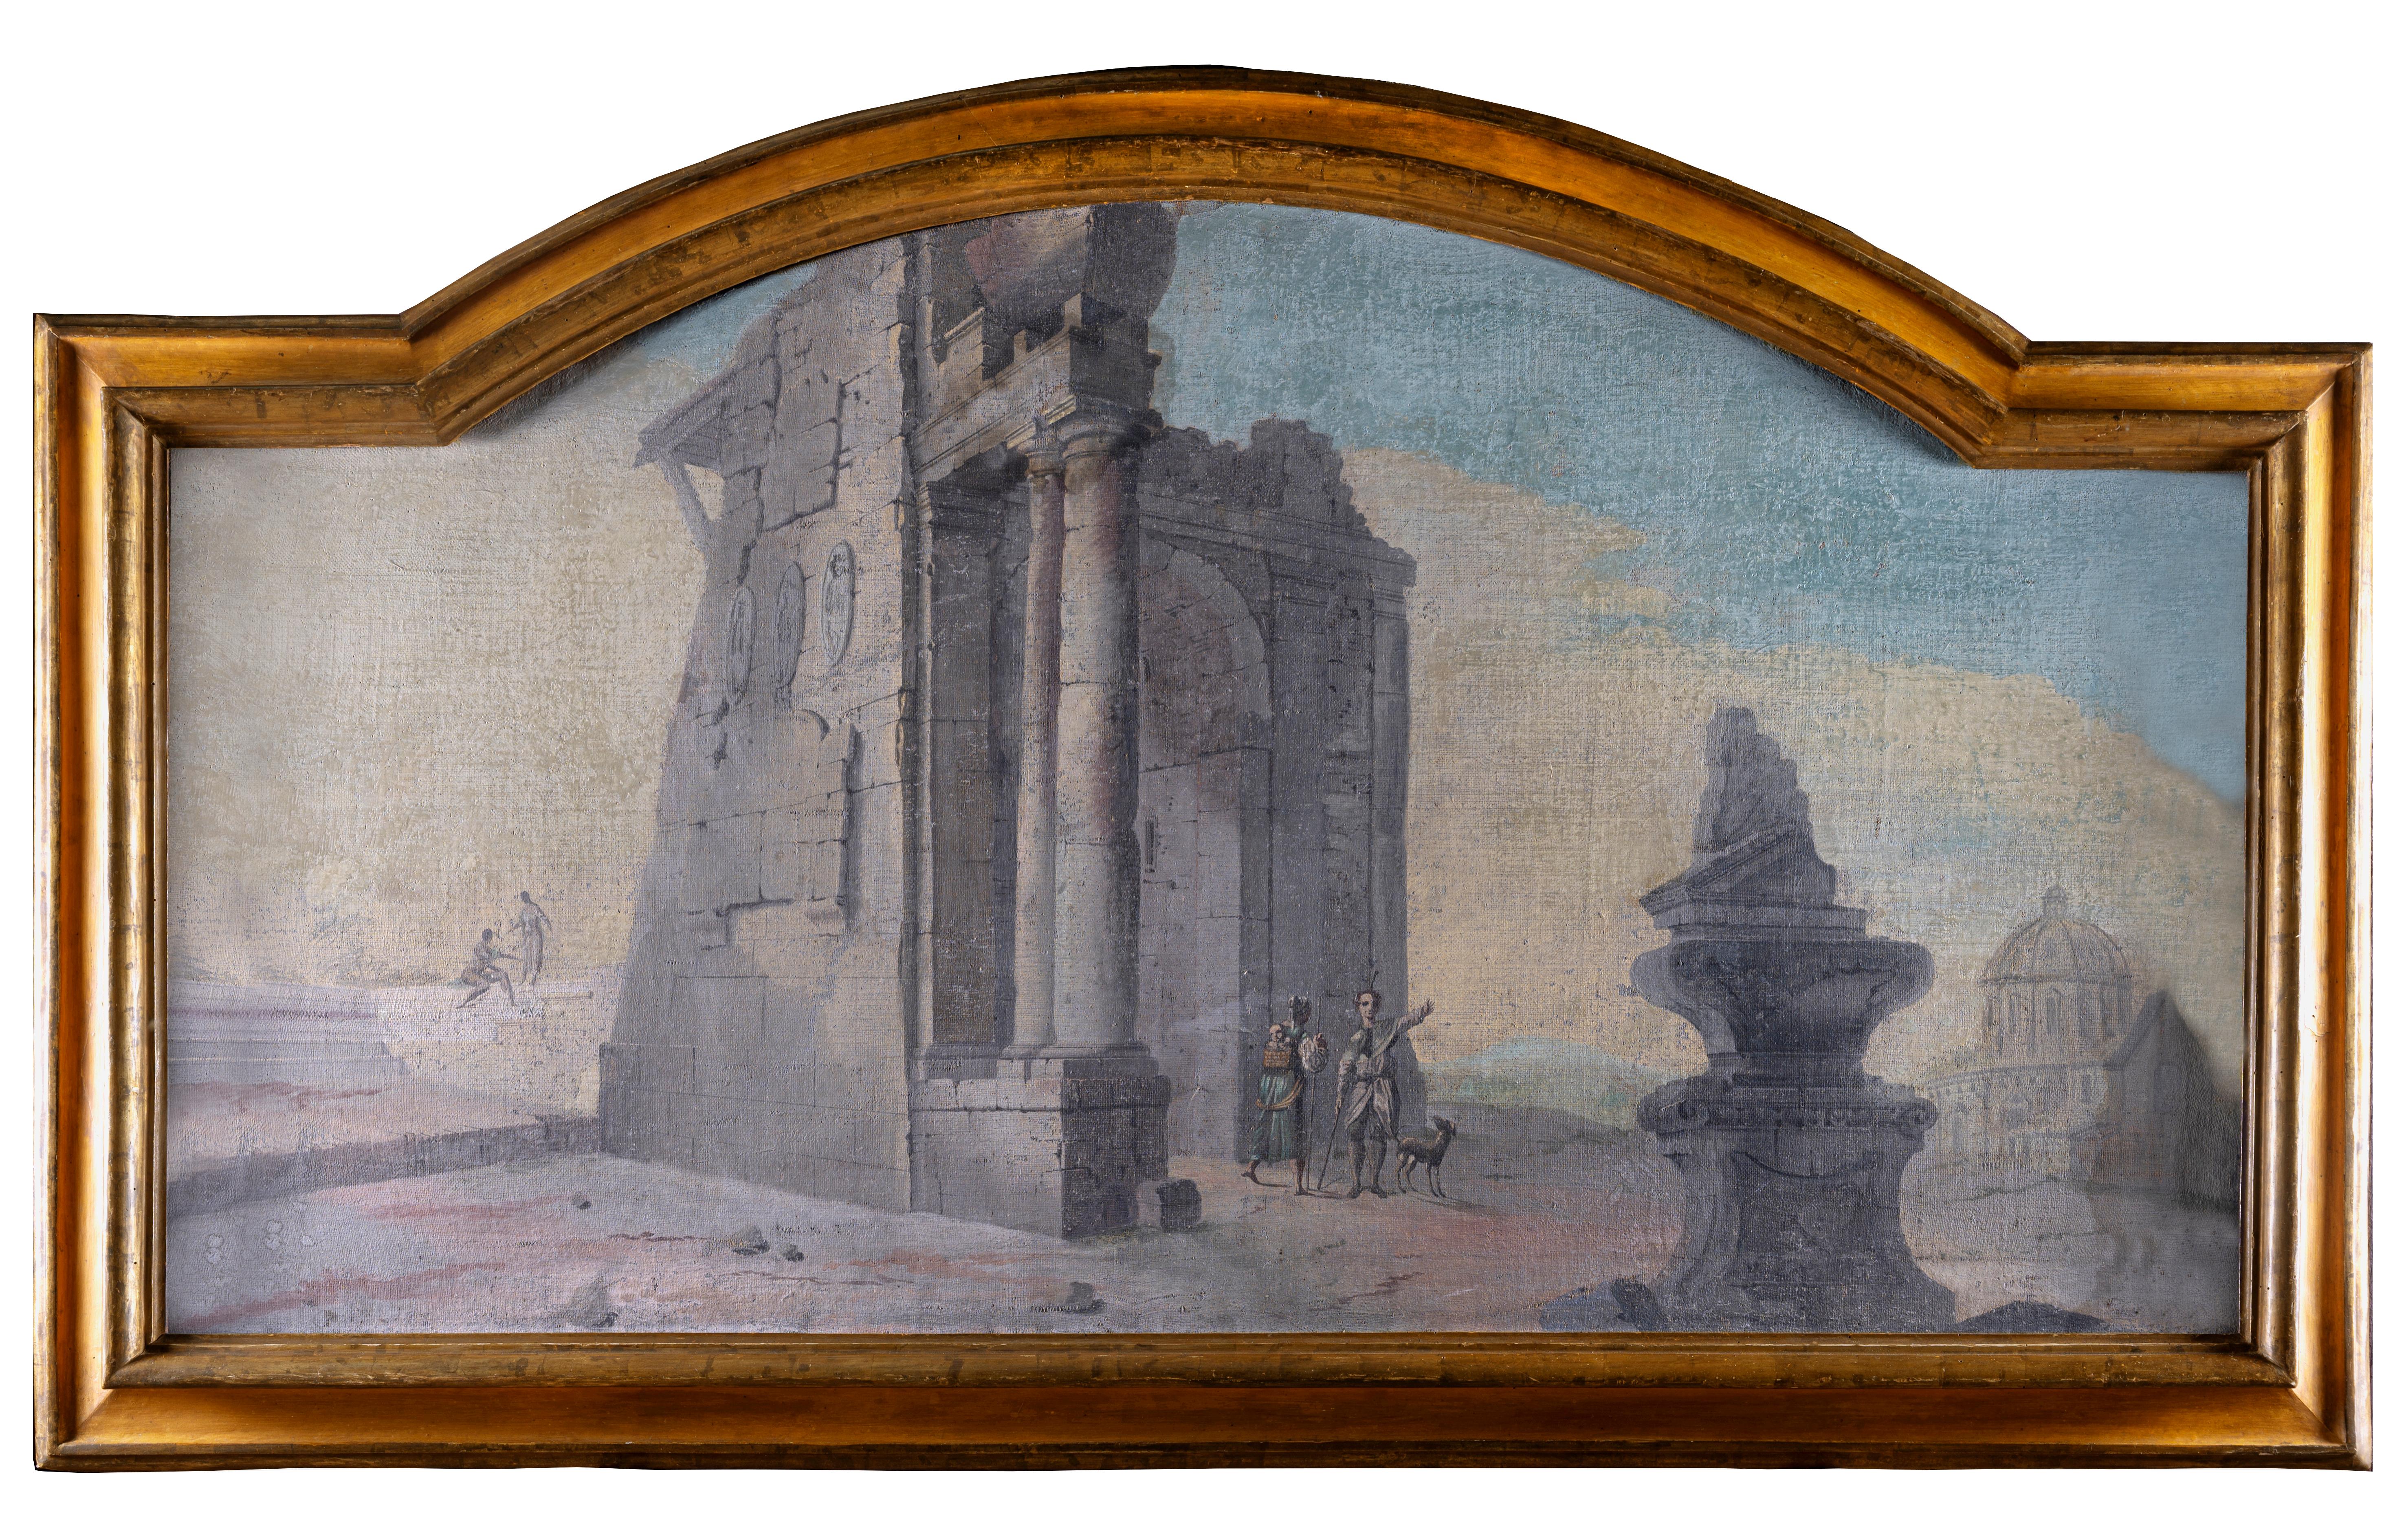 This large sized landscape is a mid-18th century Italian school arched capriccio with ruins and figures, painted in light blue and grey tones, originally an arched over door oil on canvas painting, relined and mounted on its original poplar